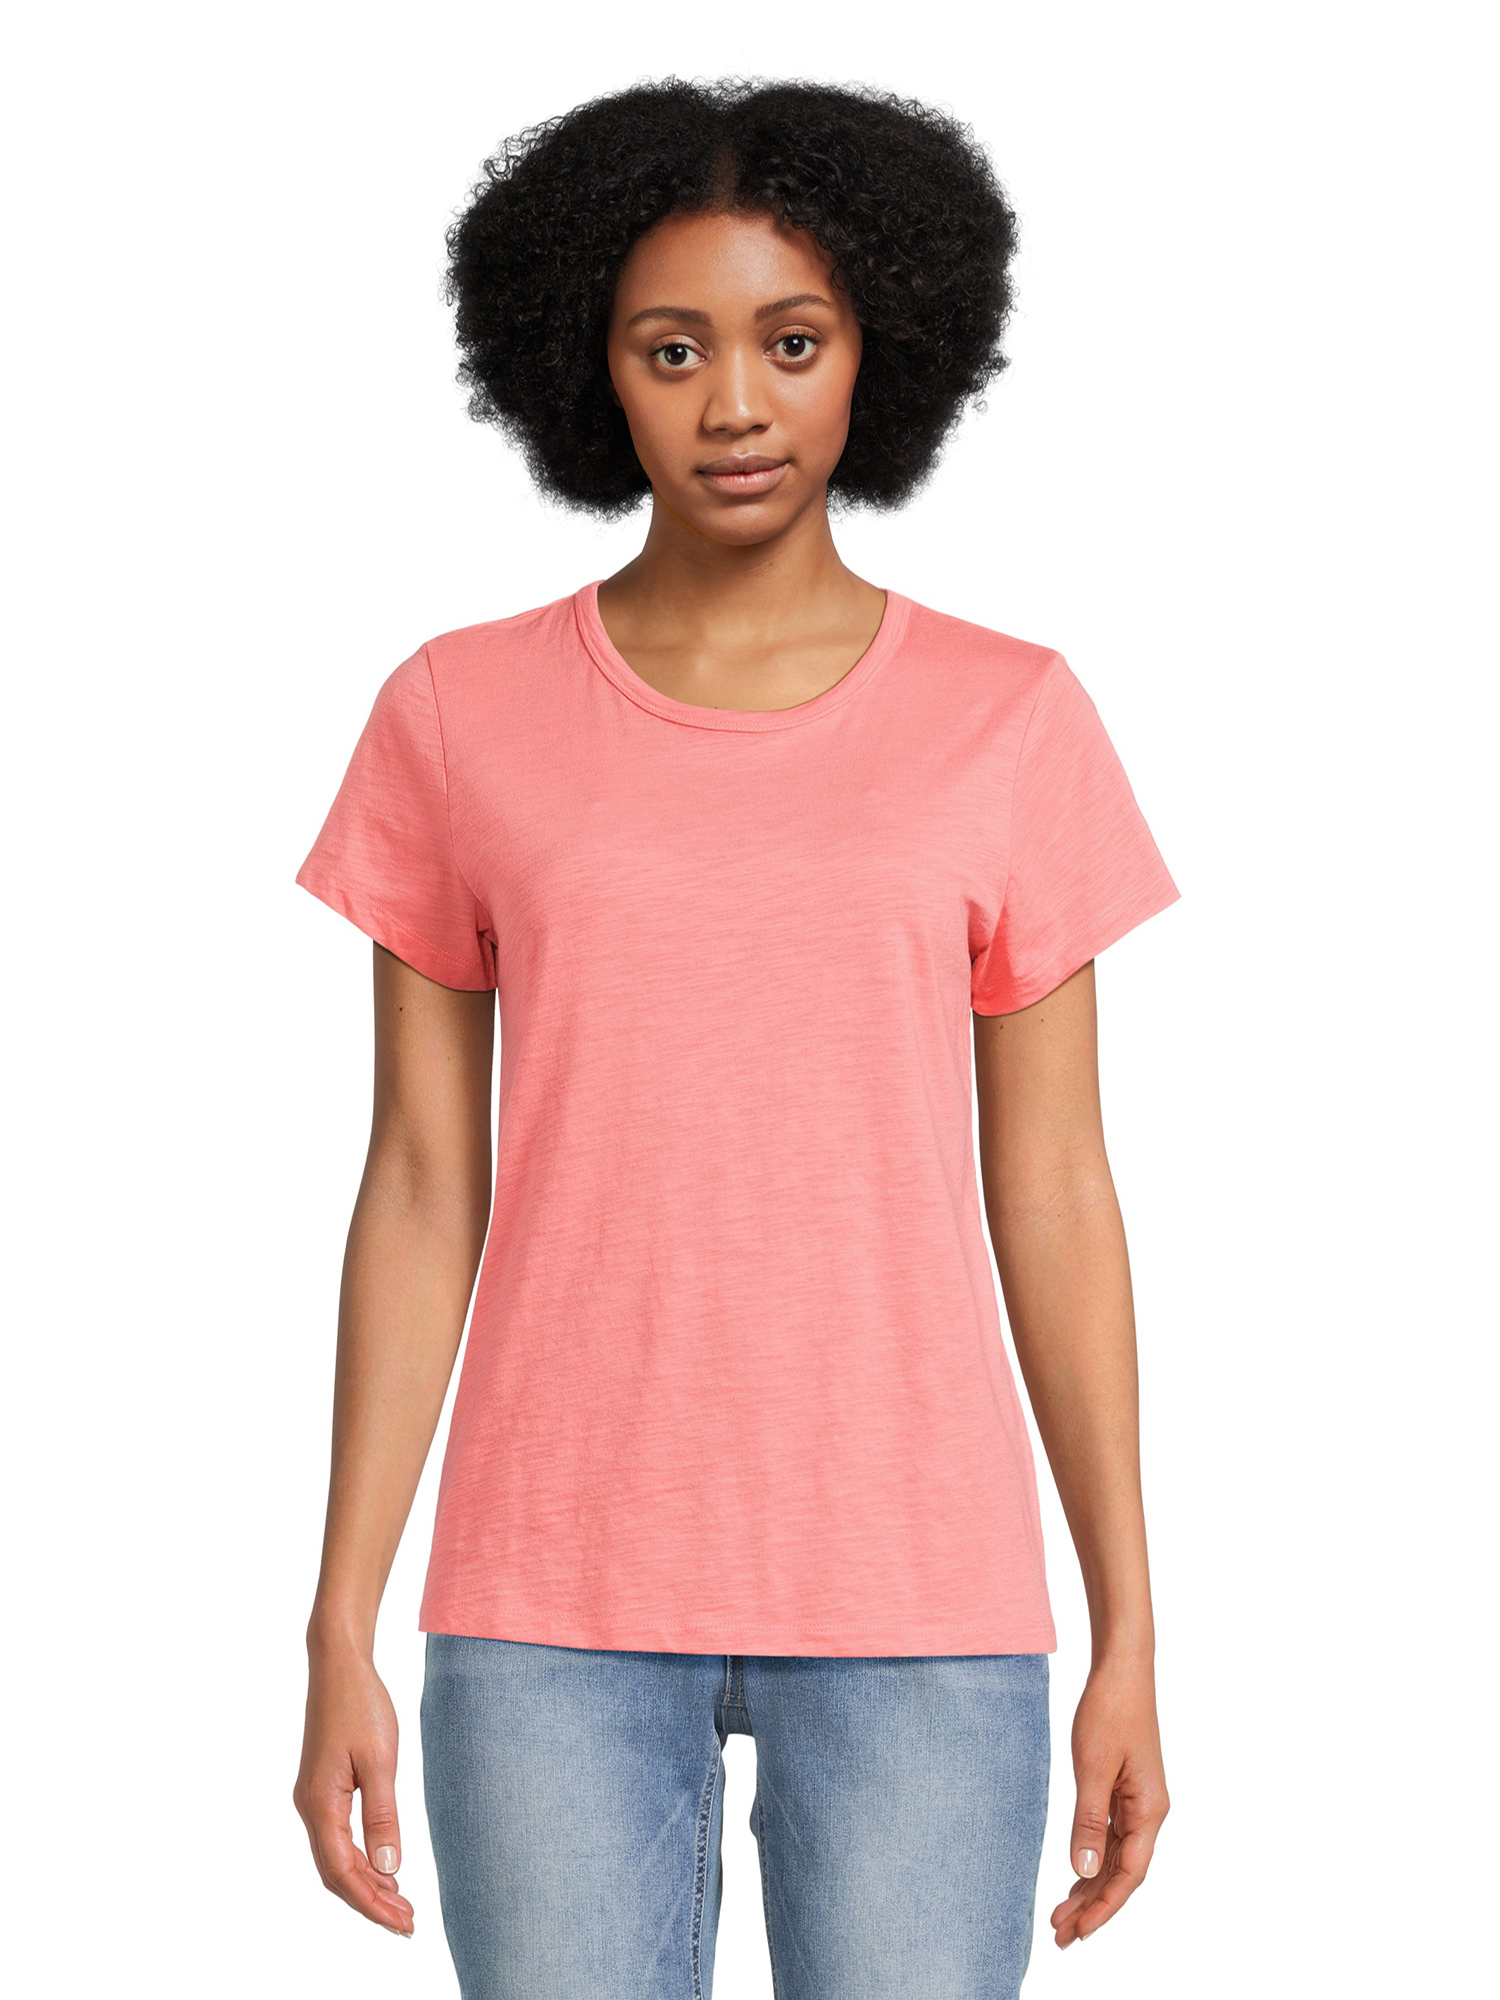 Time and Tru Women's Slub Texture Tee with Short Sleeves, Sizes S-XXXL - image 1 of 5